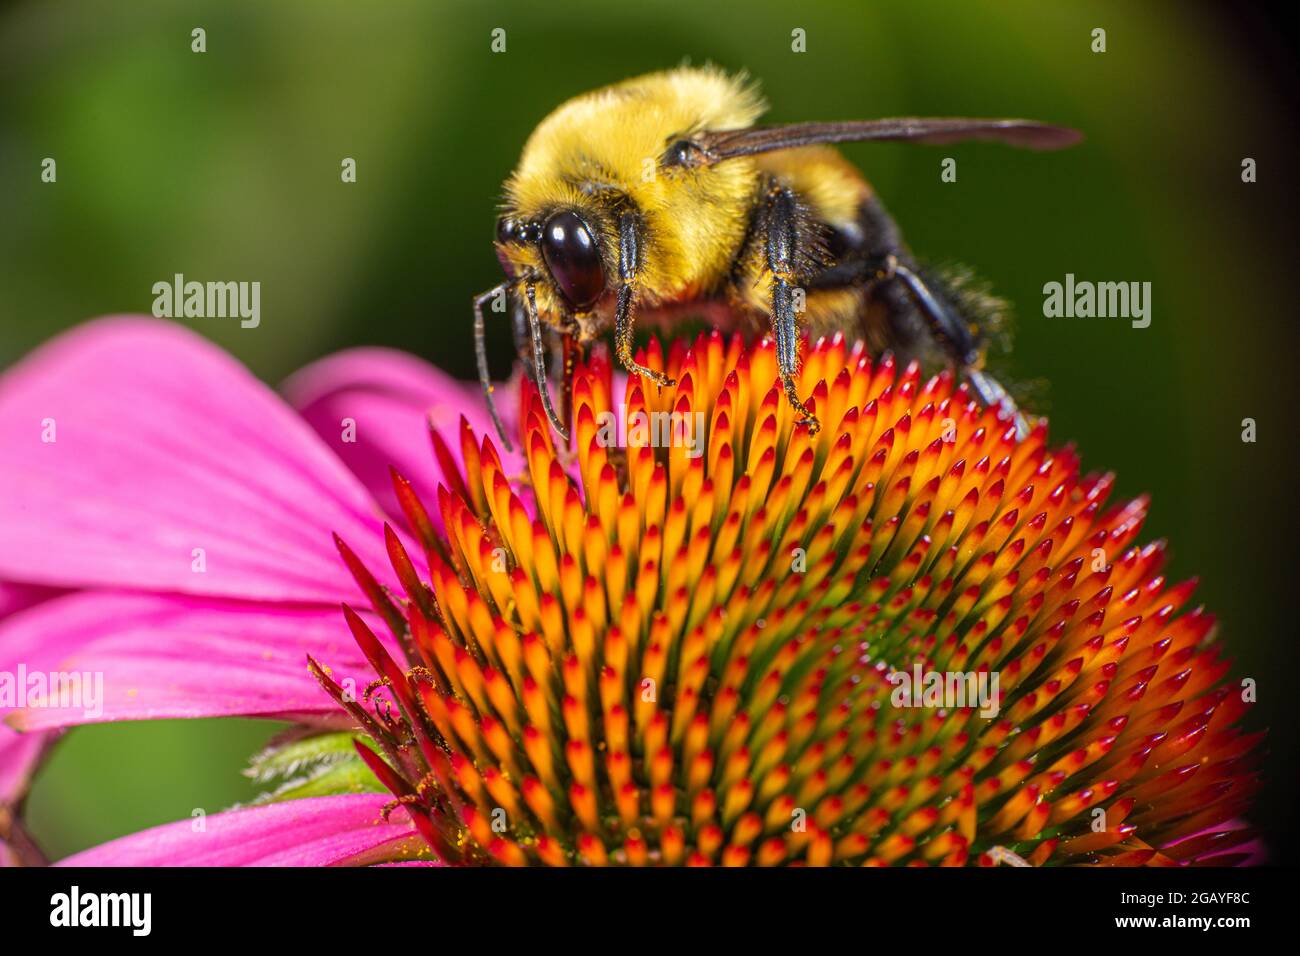 A Brown-Belted Bumble Bee (Bombus griseocollis) collecting pollen from an Echinacea coneflower. Stock Photo